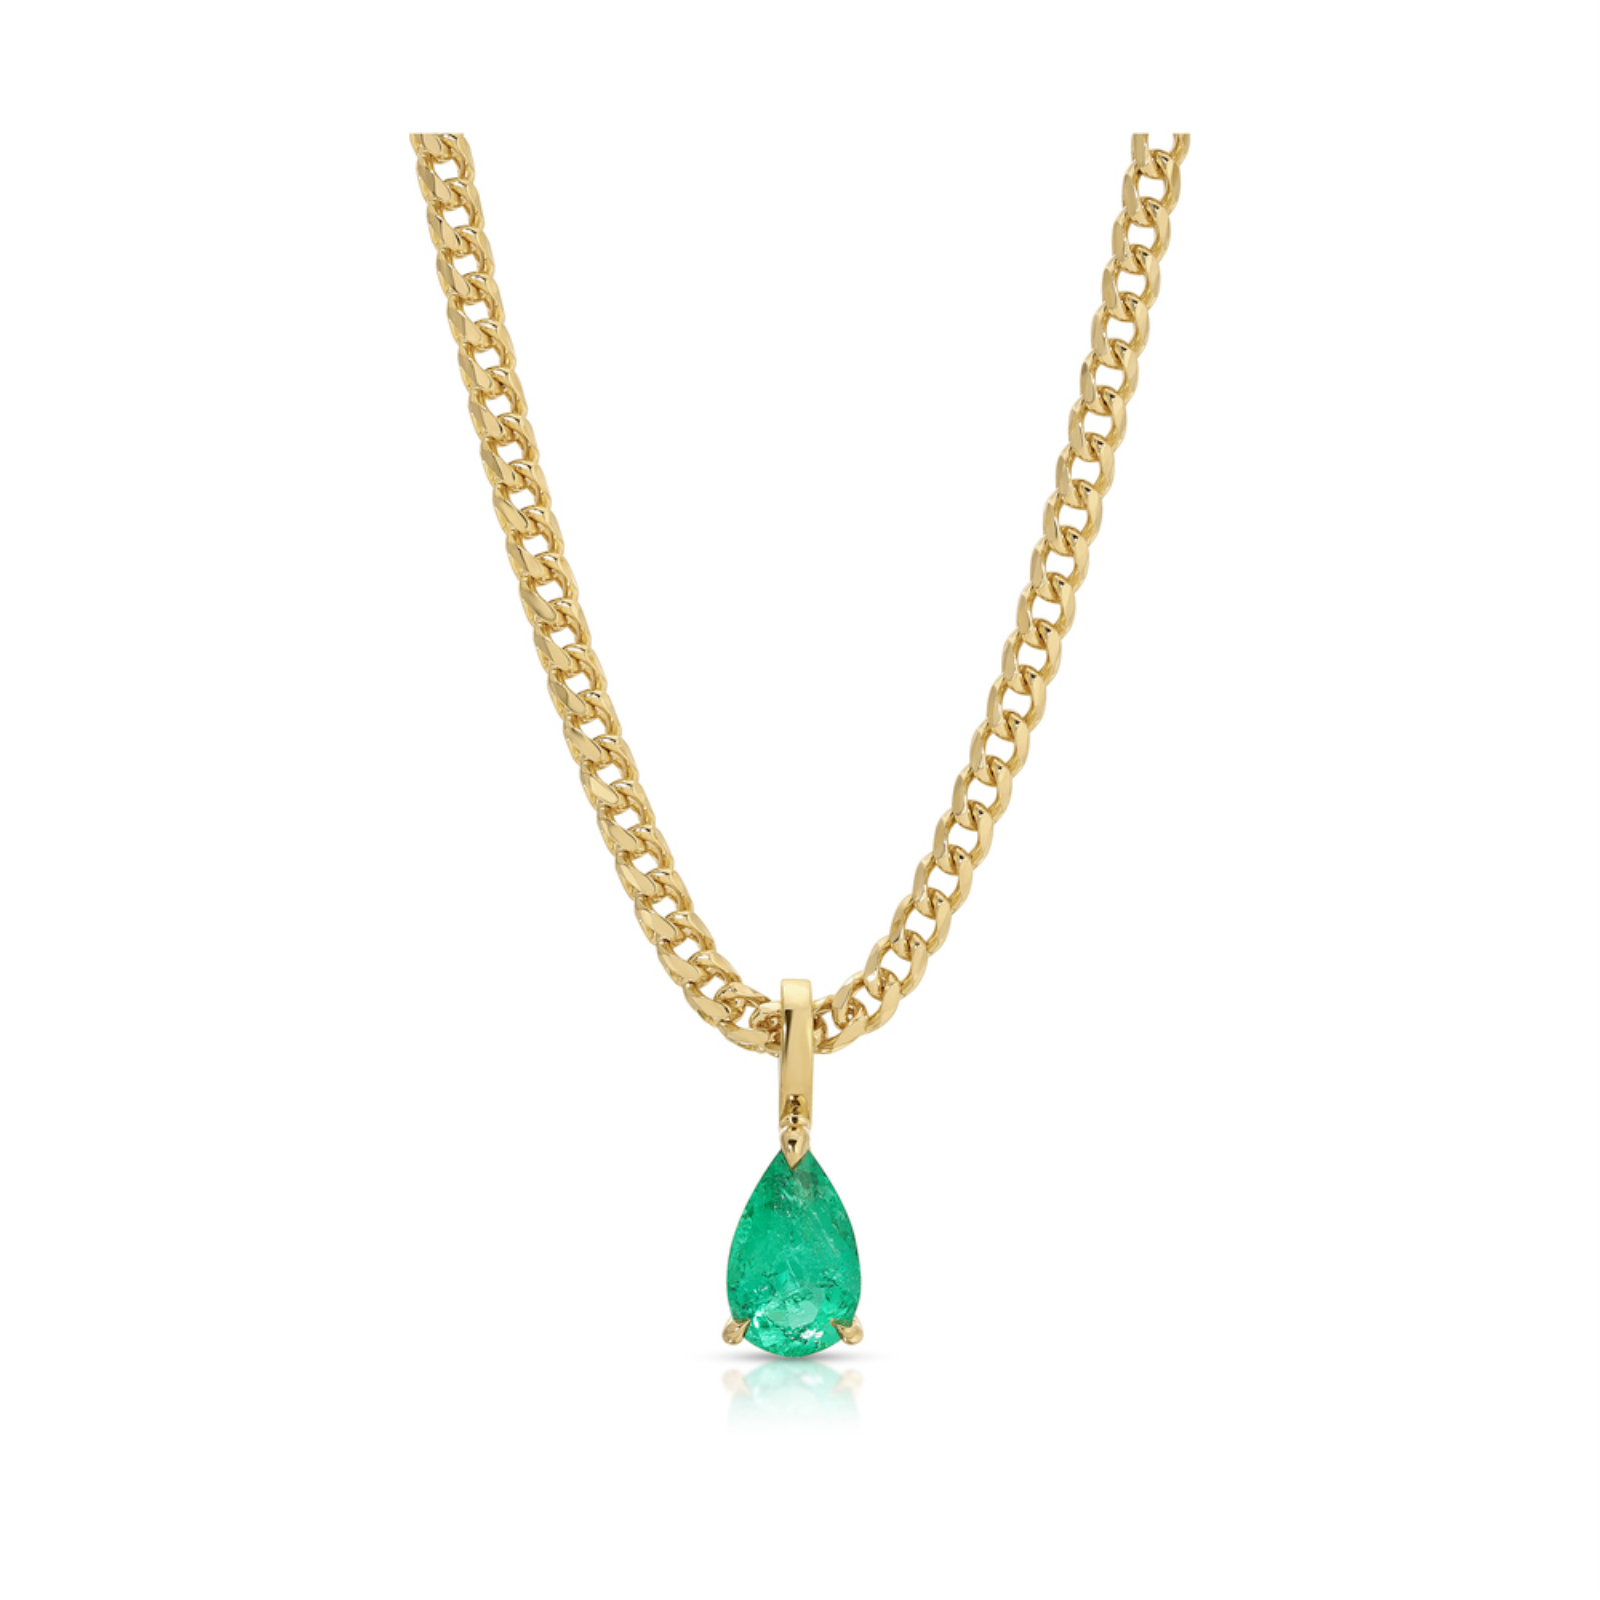 COLOMBIAN PEAR EMERALD PENDANT ON THIN FRANCO CHAIN